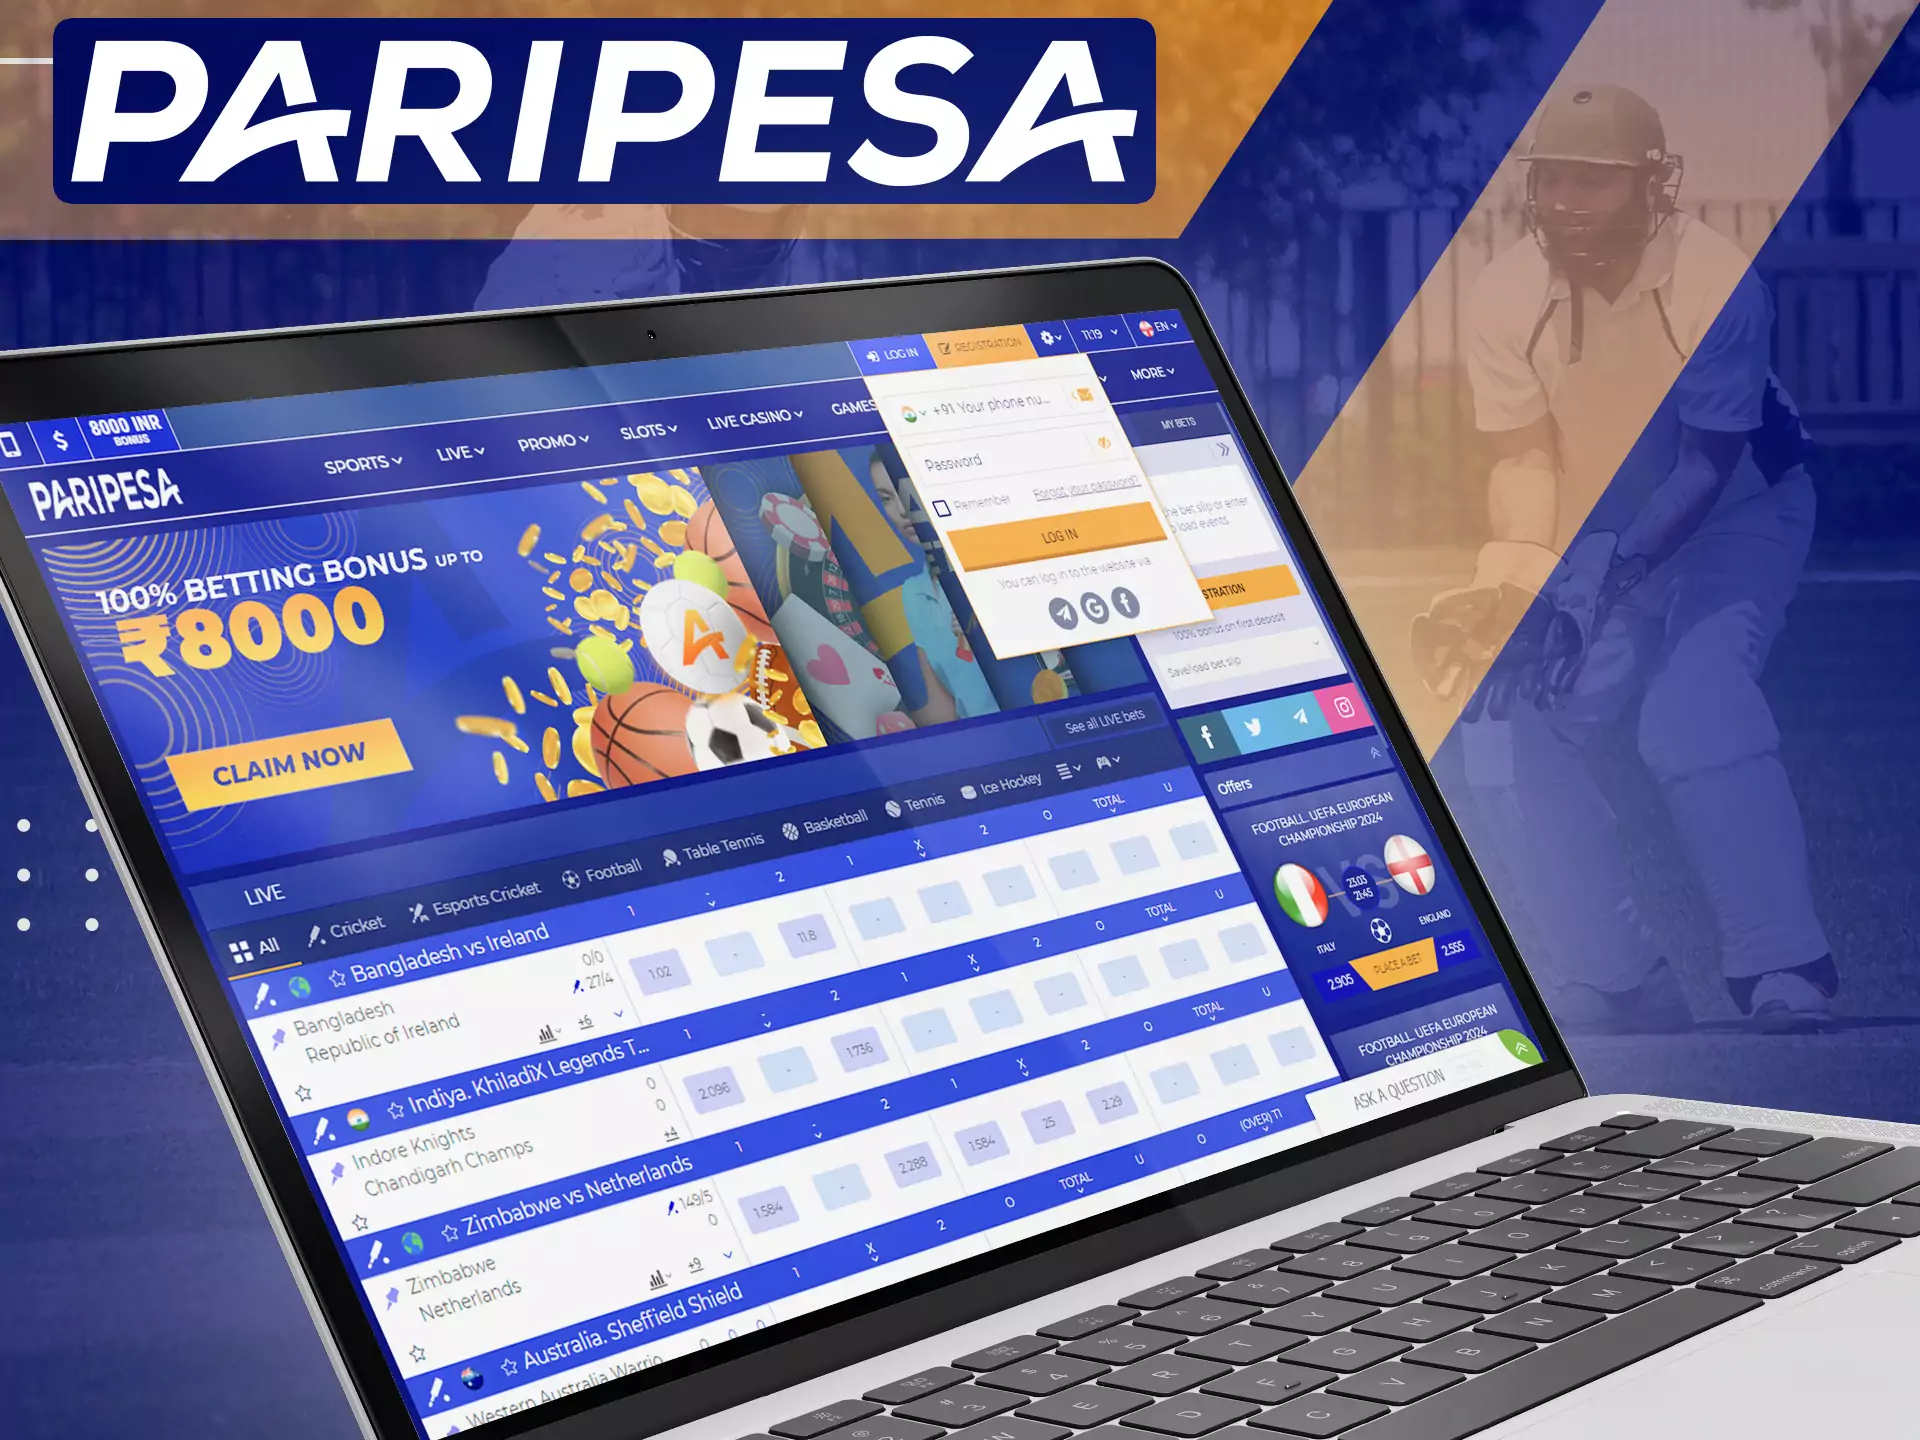 Login to your Paripesa account to get access to all features and bonuses.